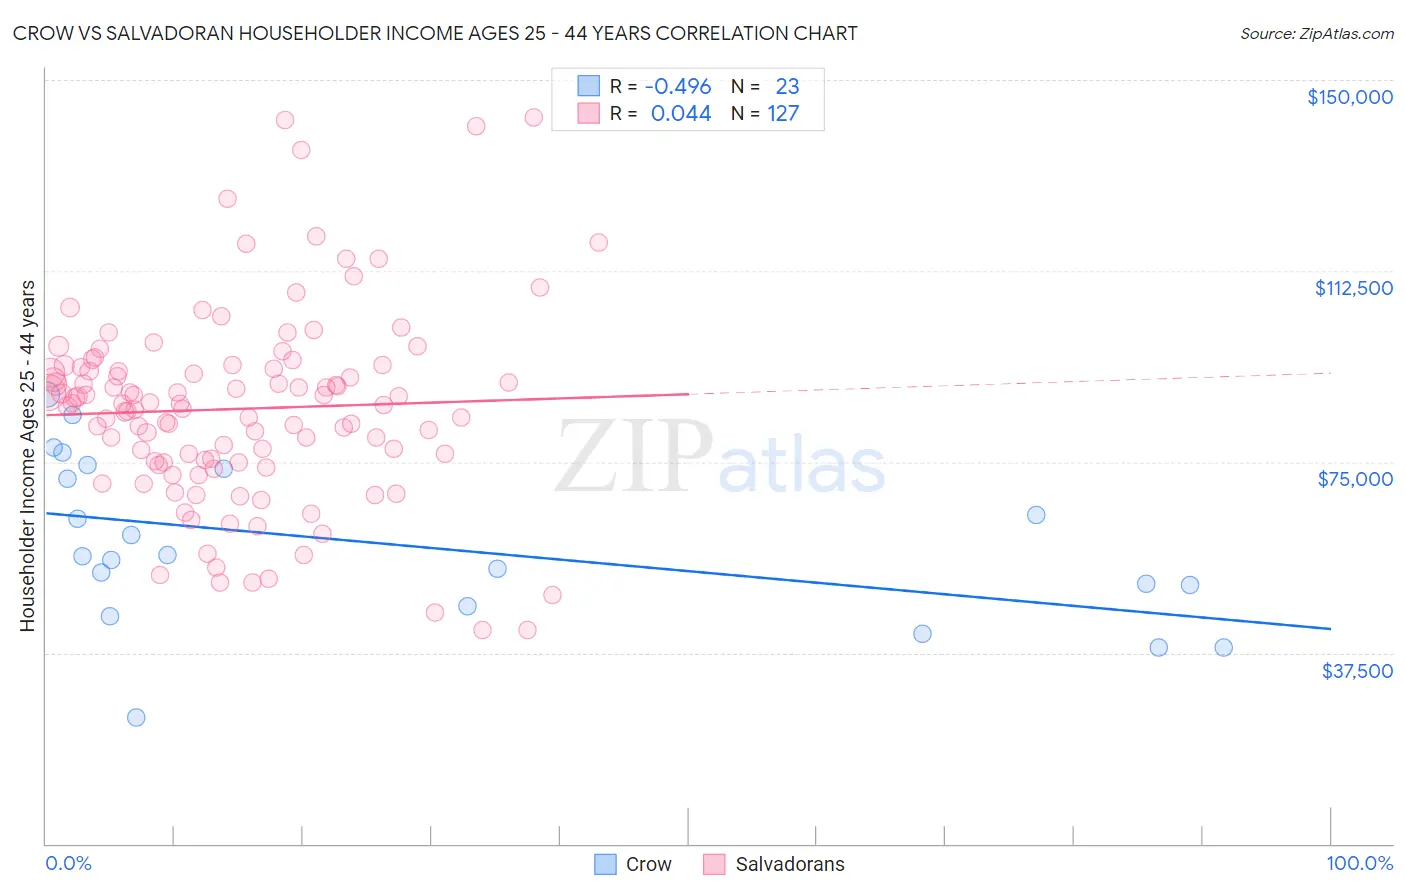 Crow vs Salvadoran Householder Income Ages 25 - 44 years